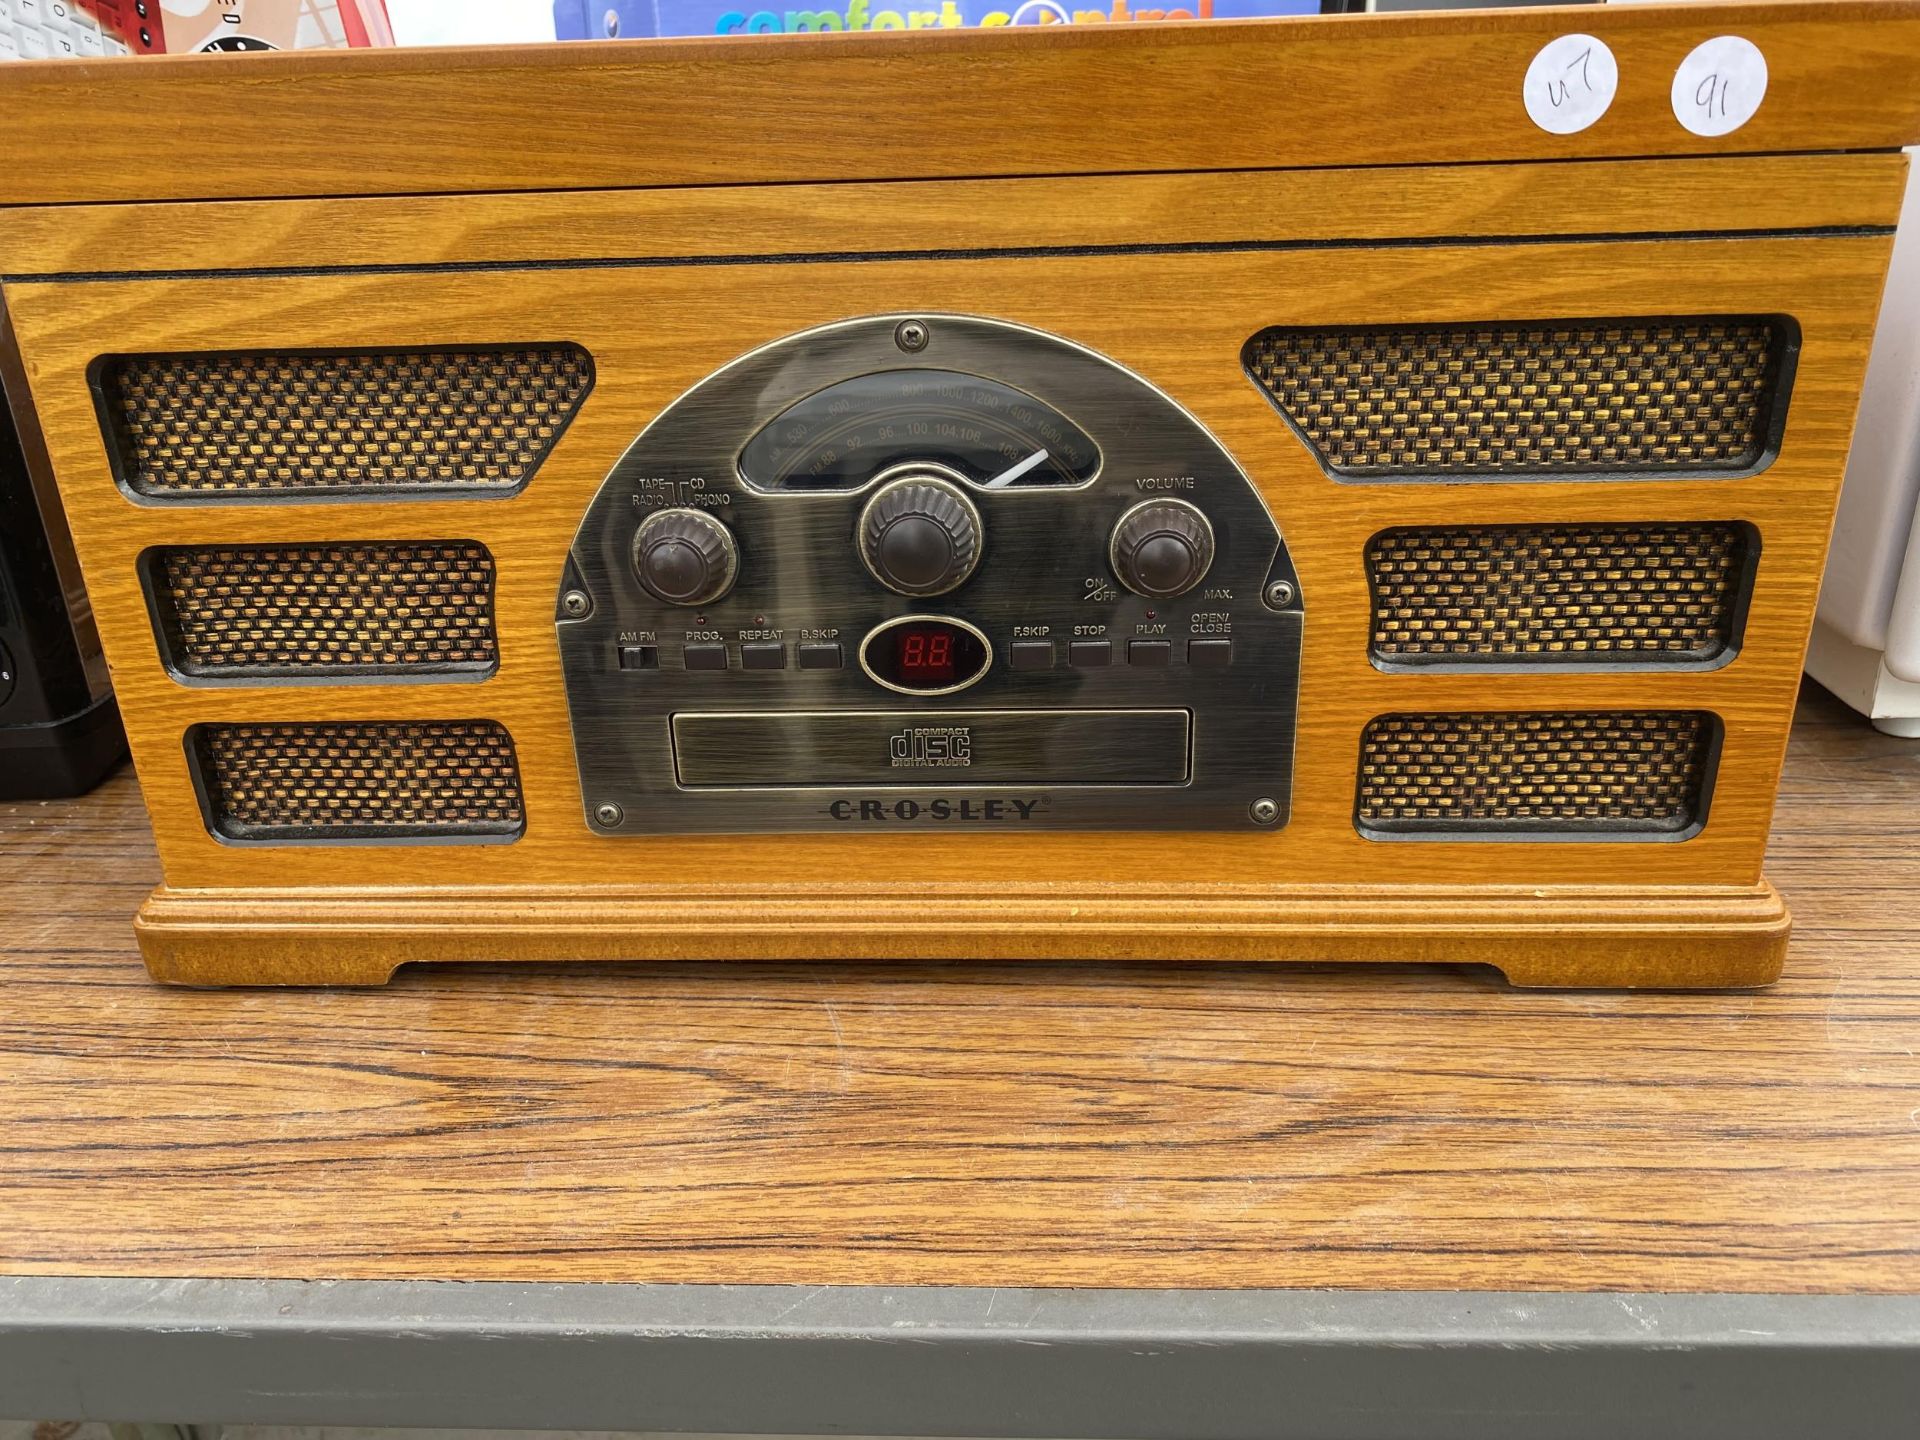 A CROSLEY RECORD PLAYER WITH WOODEN CASING - Image 2 of 4